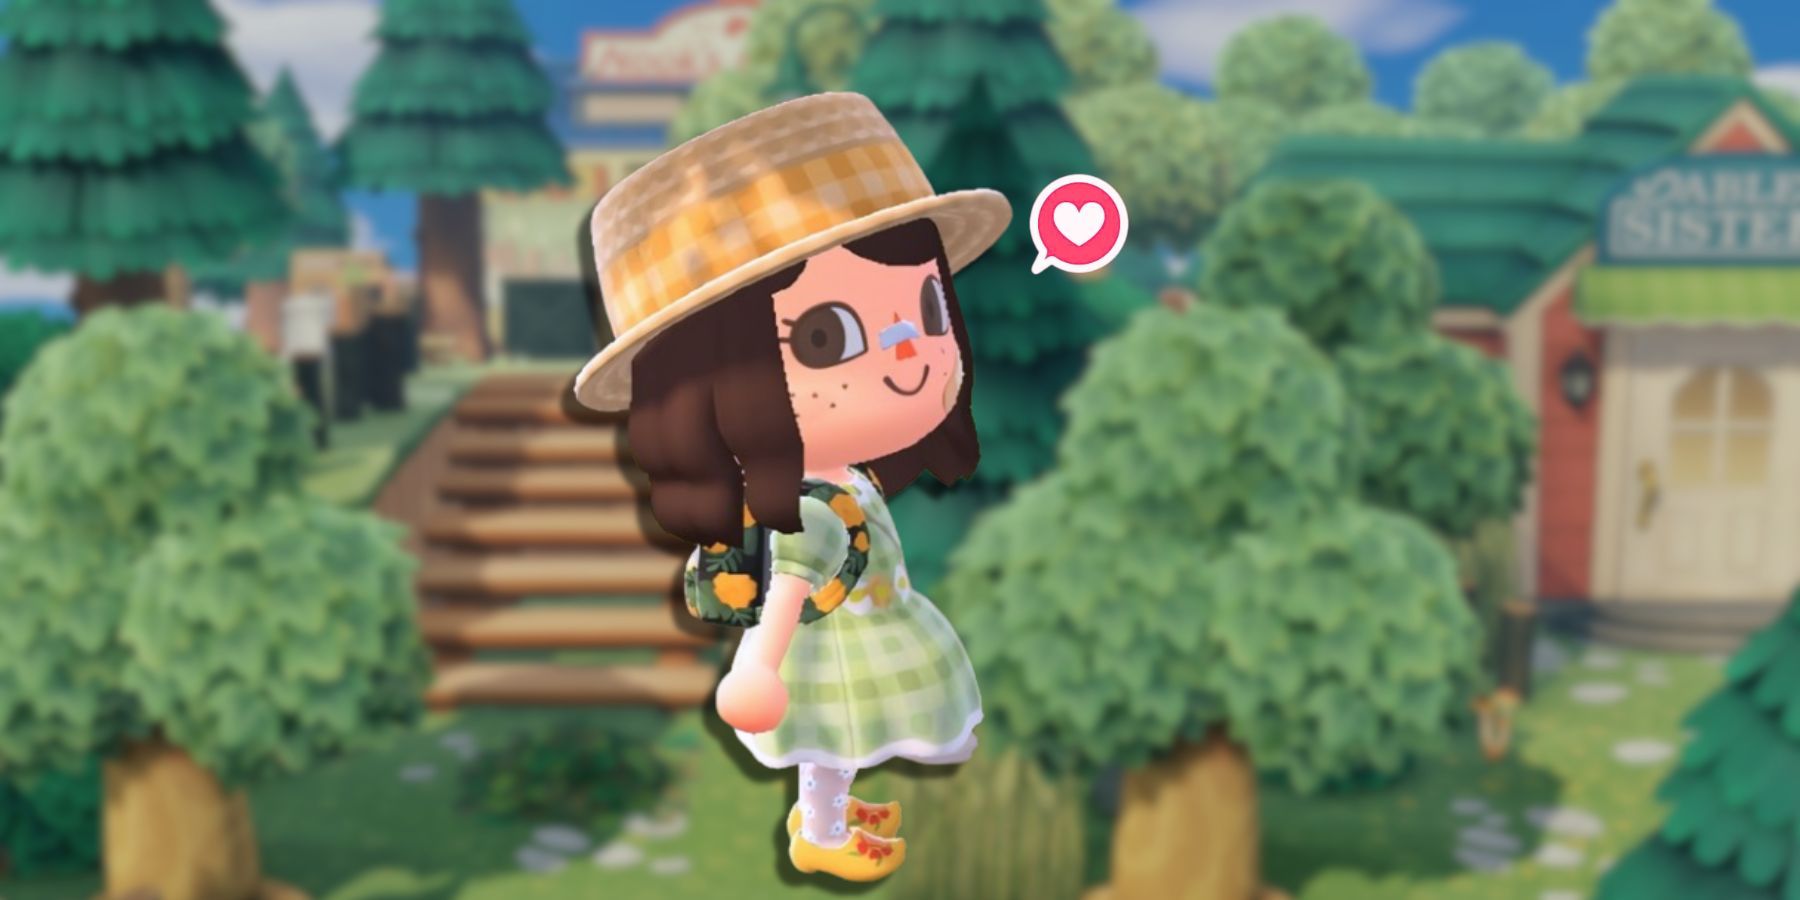 New Leaf's Most Charming Feature Should Return in the Next Animal Crossing